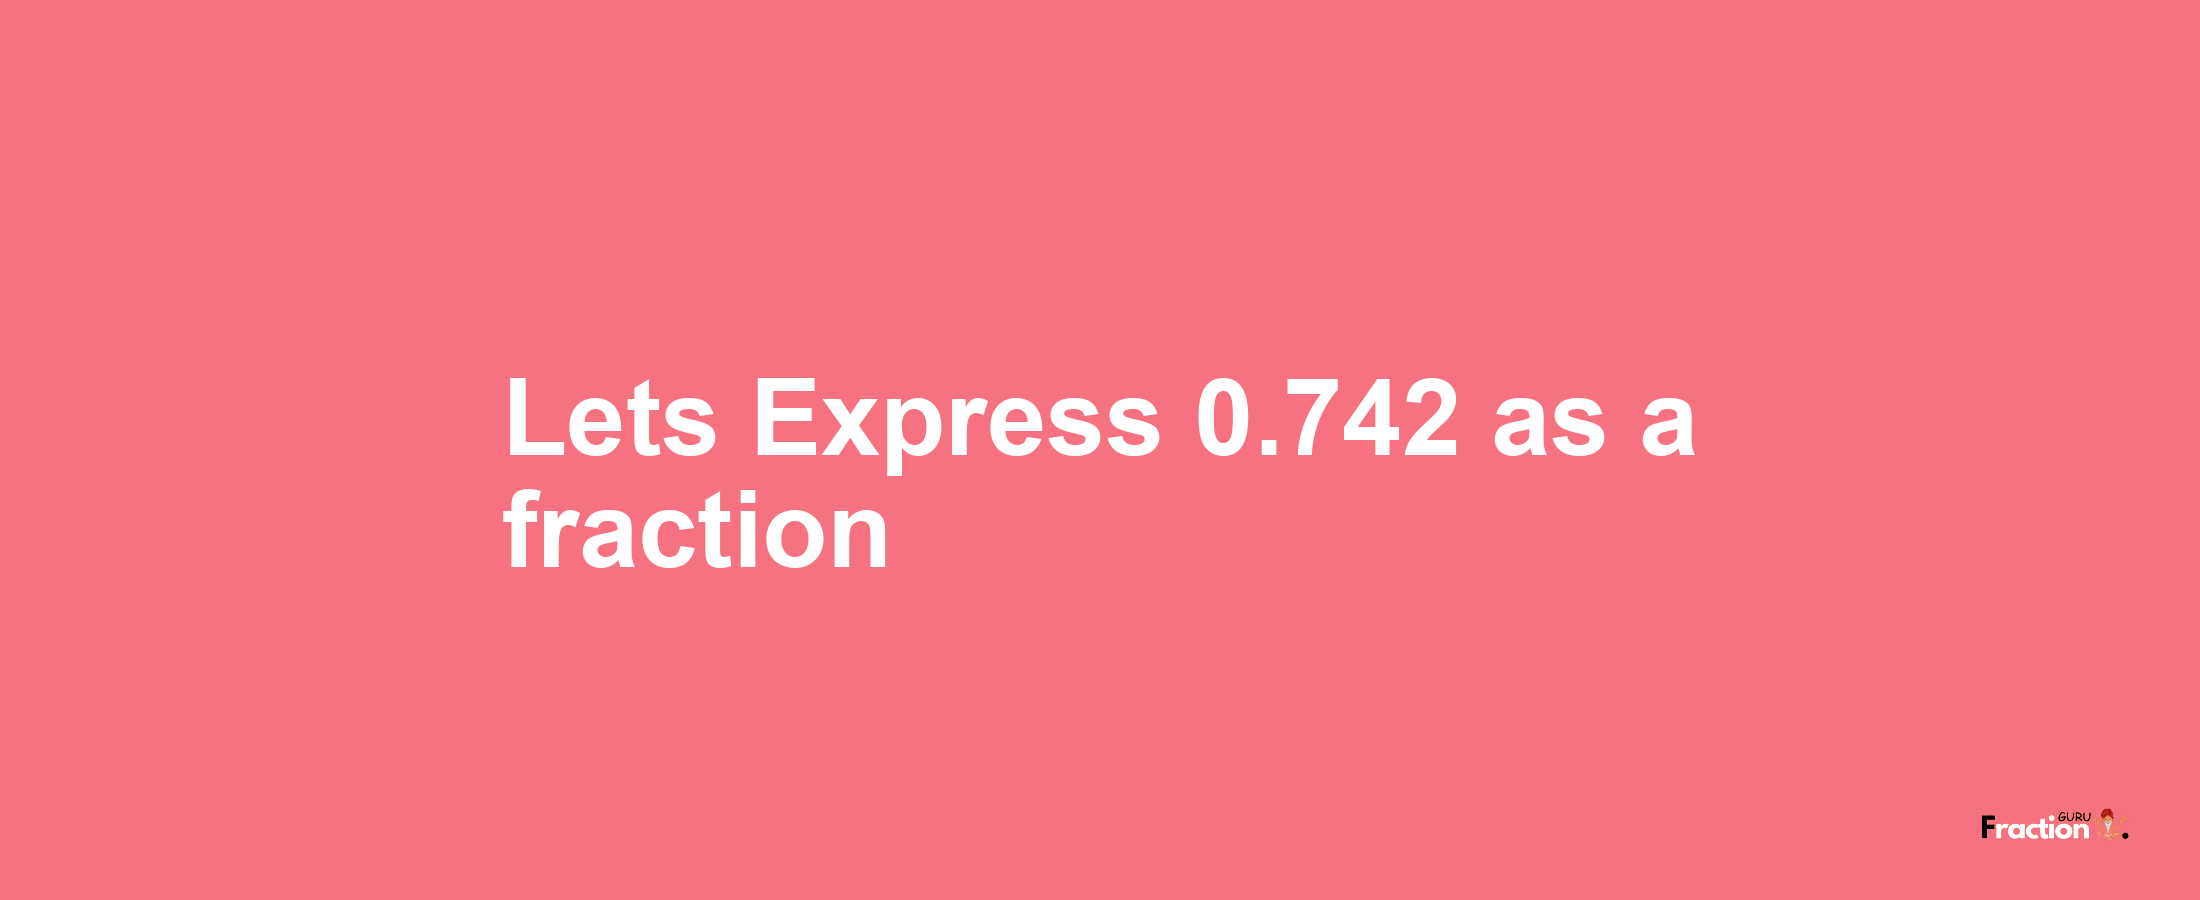 Lets Express 0.742 as afraction